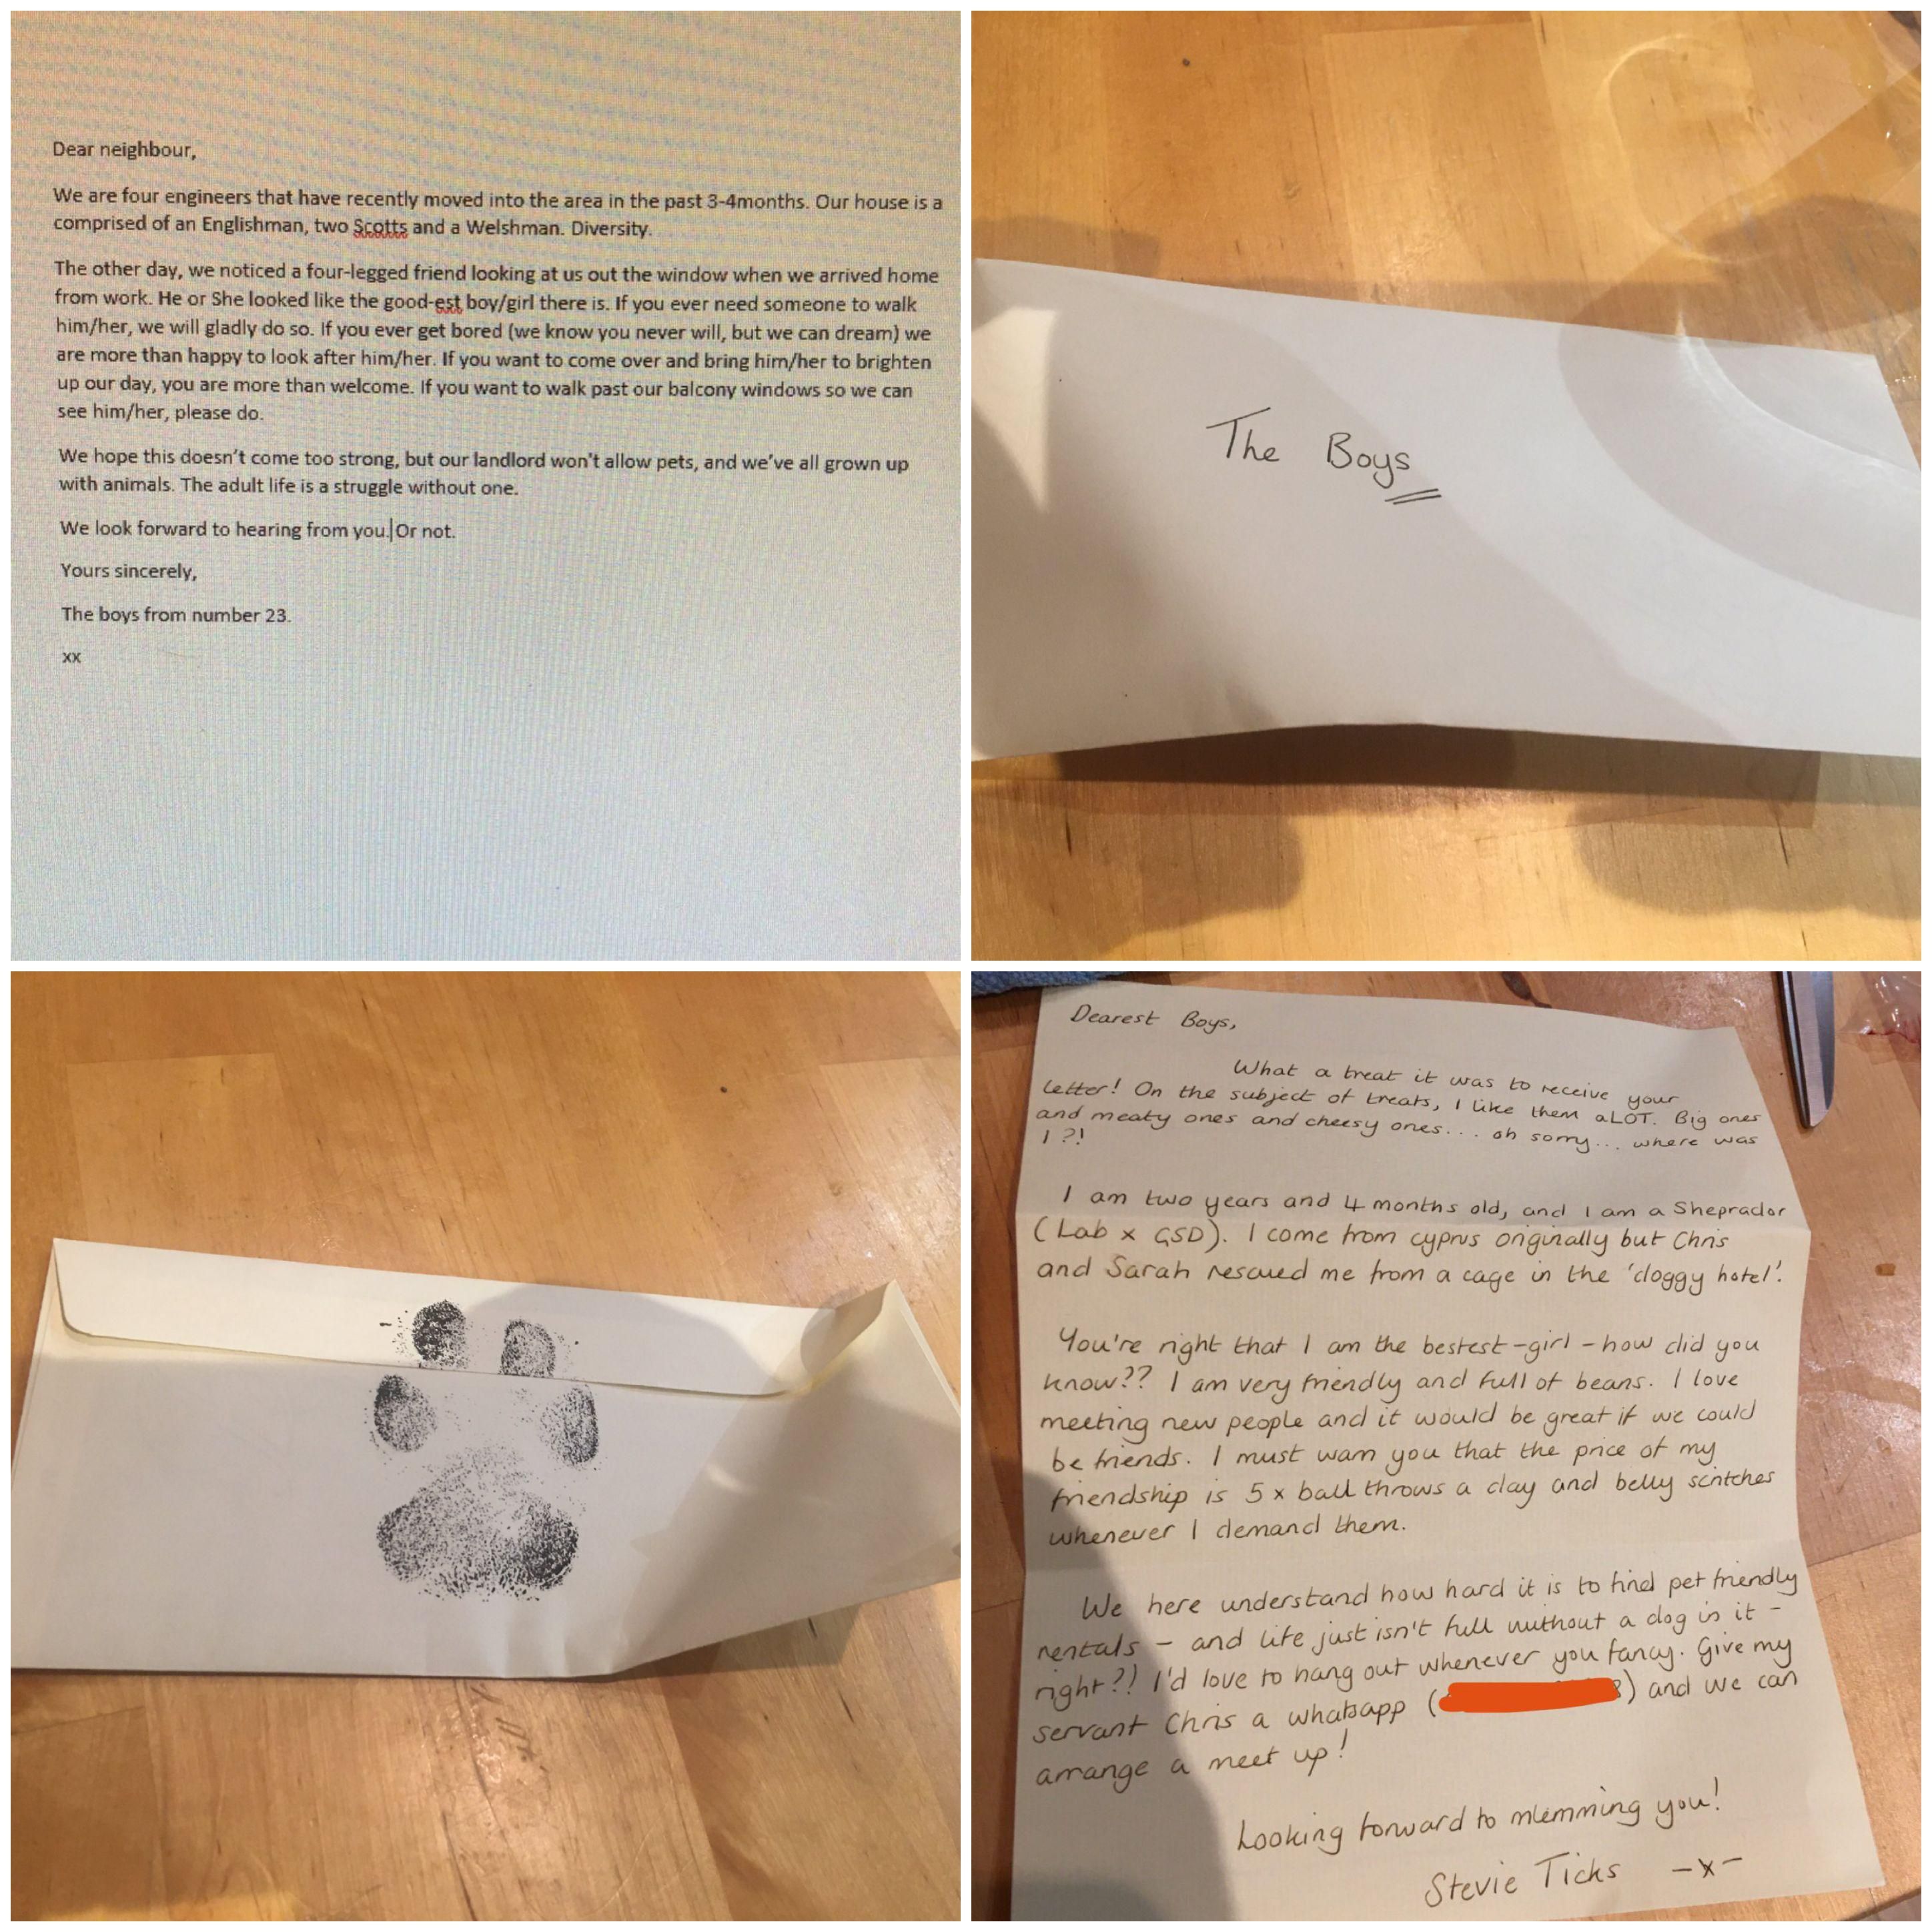 Some guys were looking for a furry friend. They received the best response ever.